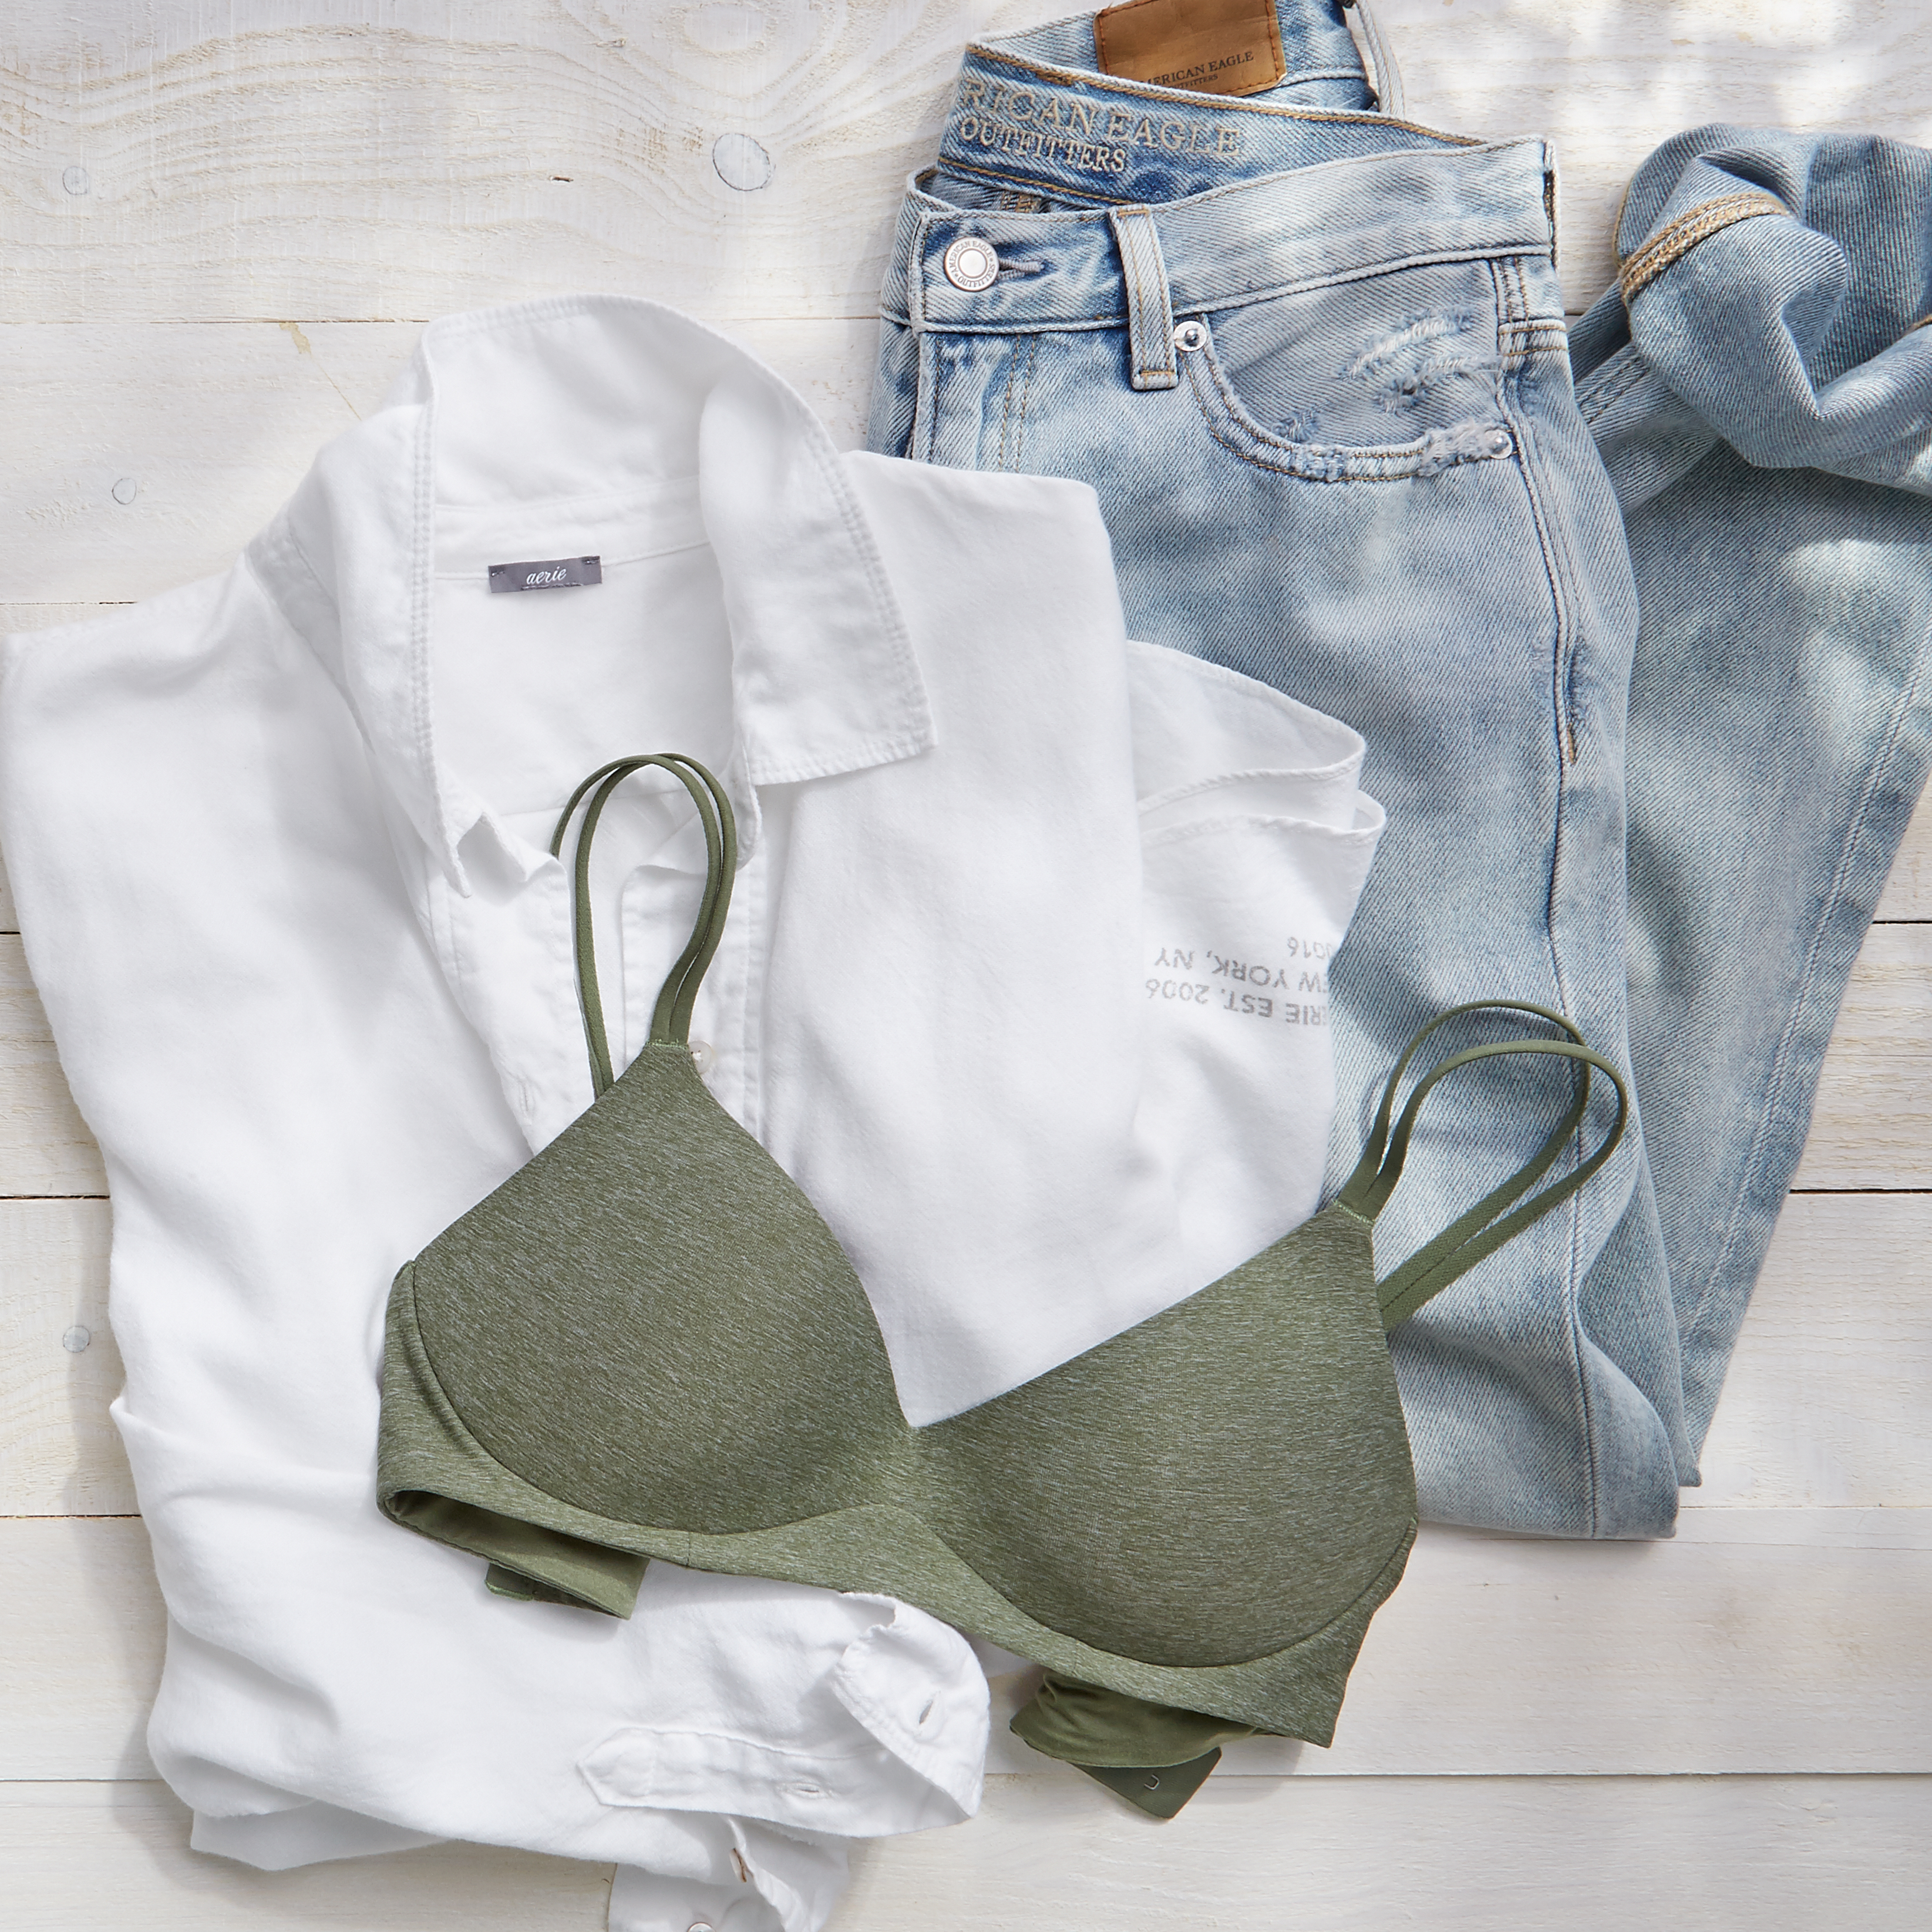 Aerie bras make you feel real good! - #AerieREAL Life